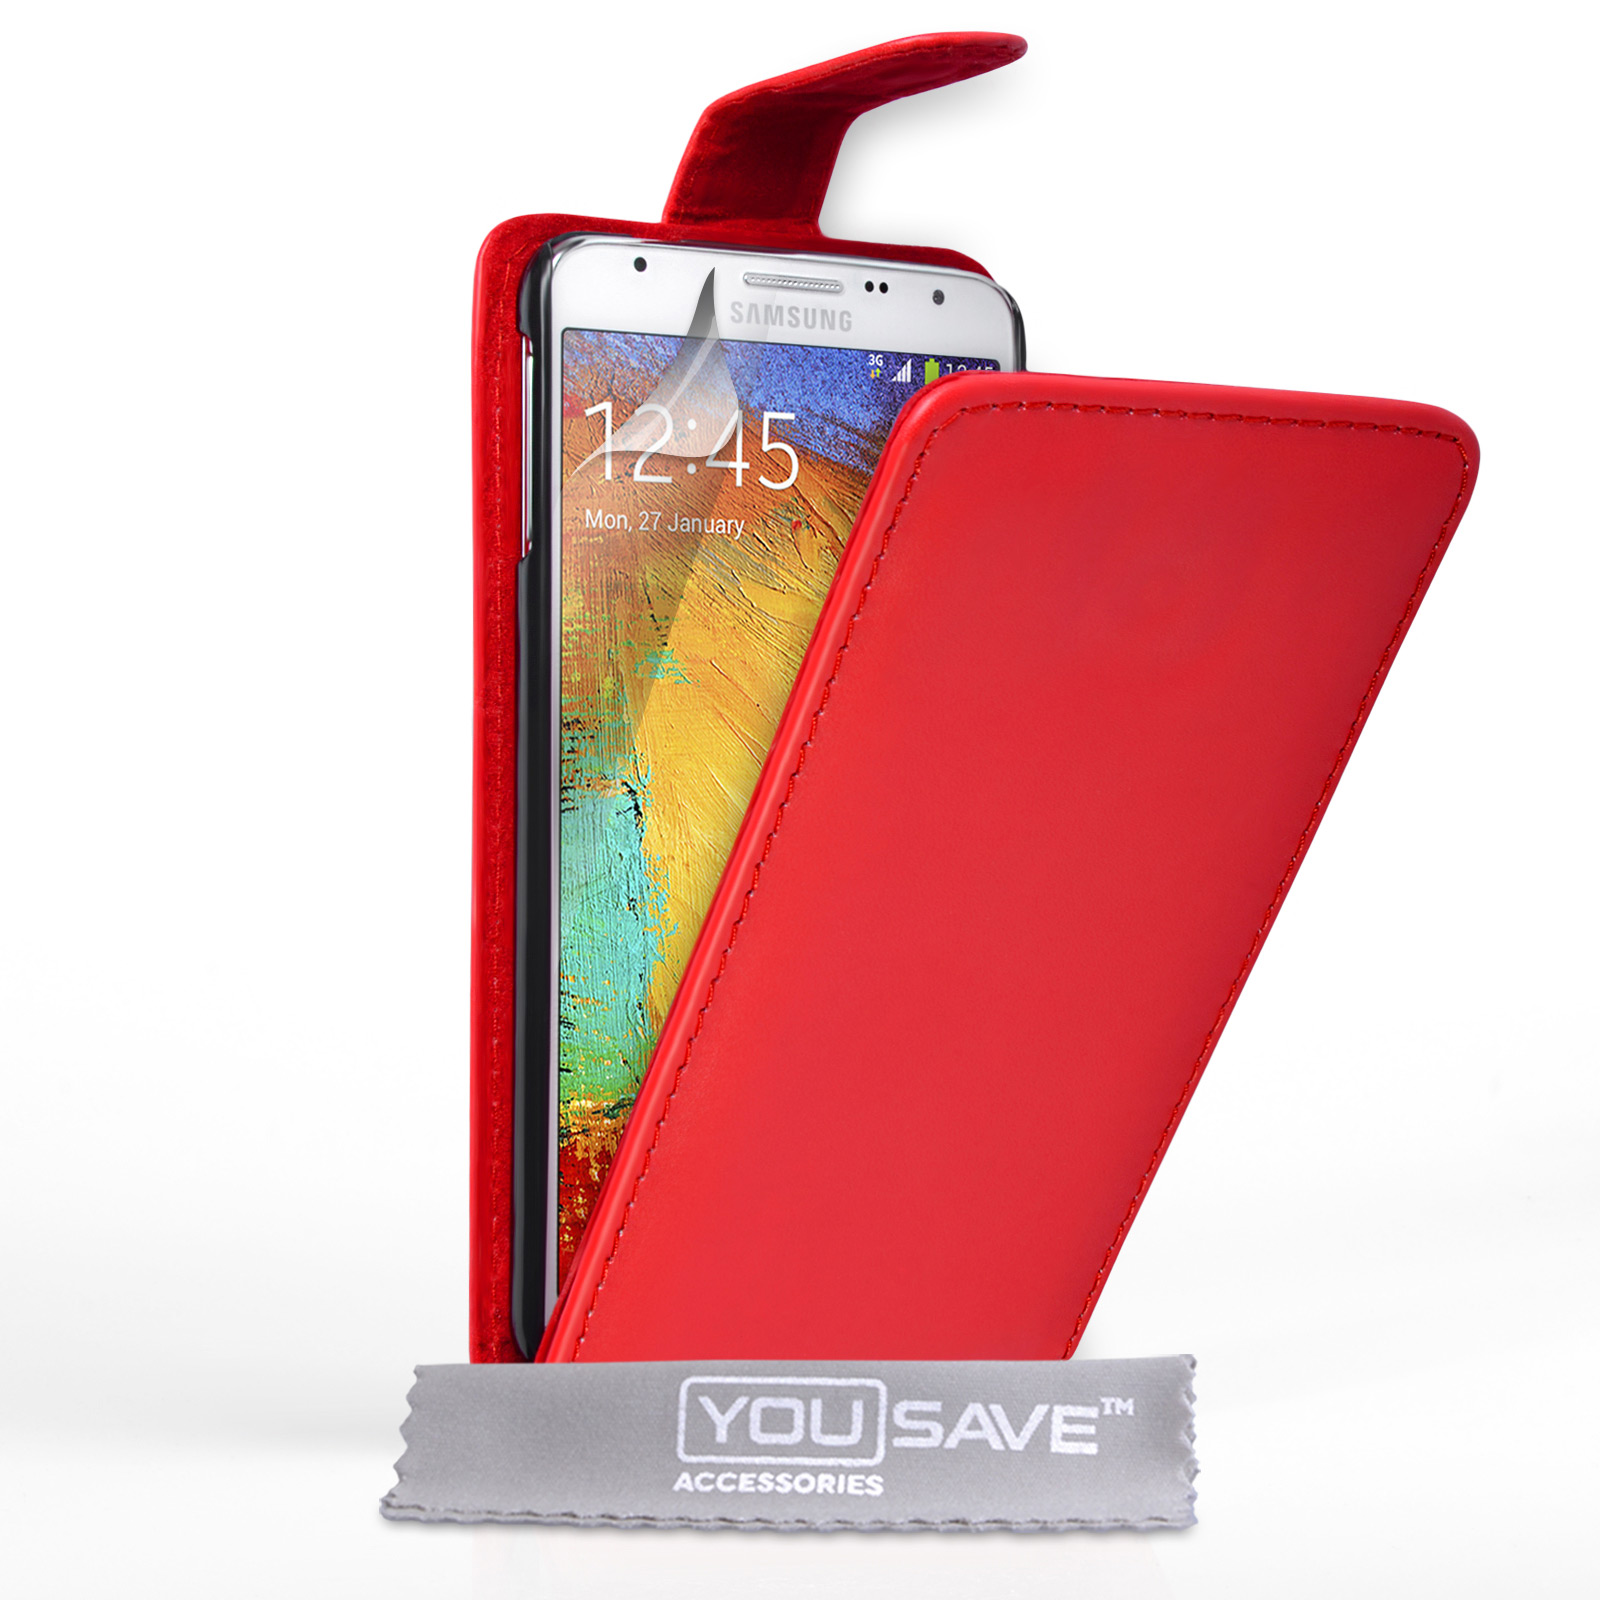 YouSave Samsung Galaxy Note 3 Neo Leather-Effect Flip Case - Red